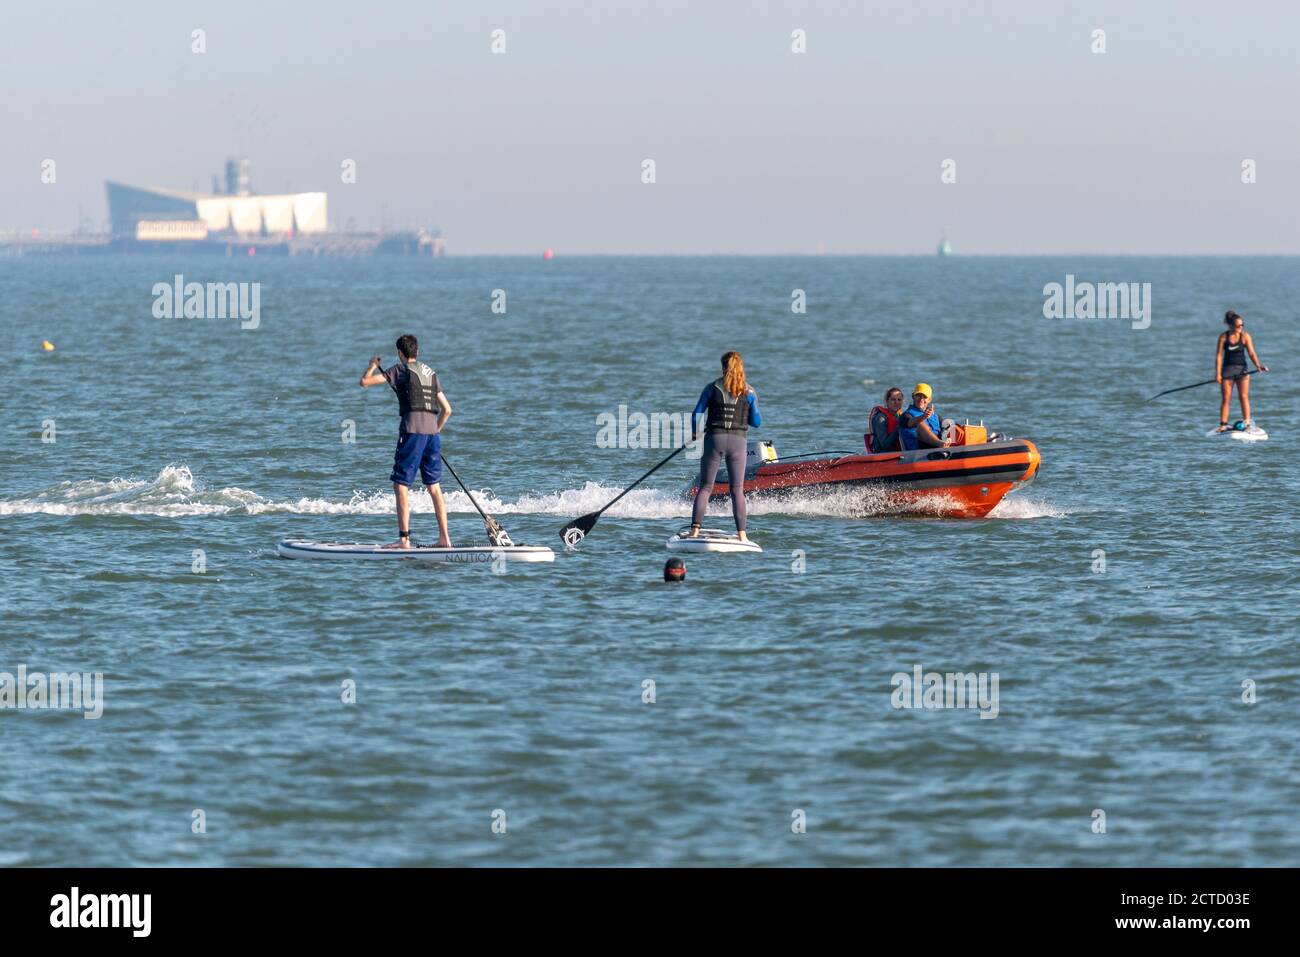 Safety boat checking on paddle boarders off Southend on Sea, Essex, UK. Watersports in Thames Estuary. Water sport activity in sea with motor dinghy Stock Photo